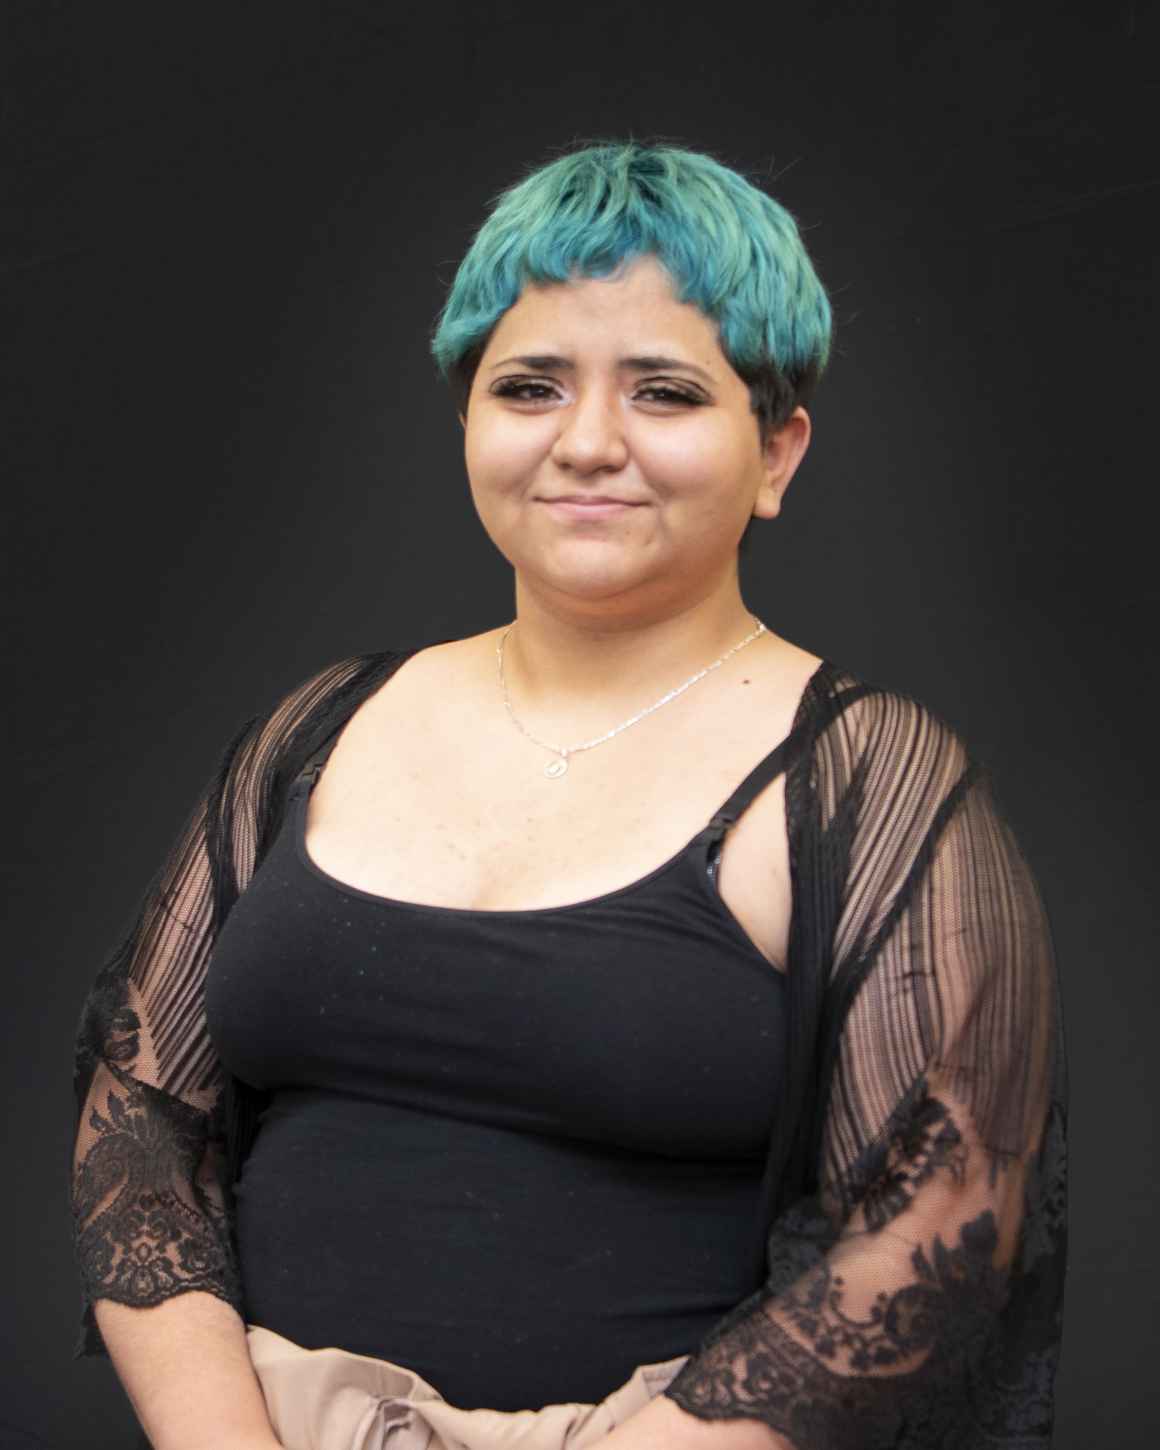 A photo of Cristina from the waist up against a black background. Cristina has short green hair and is wearing a black tank top with a black shawl. 